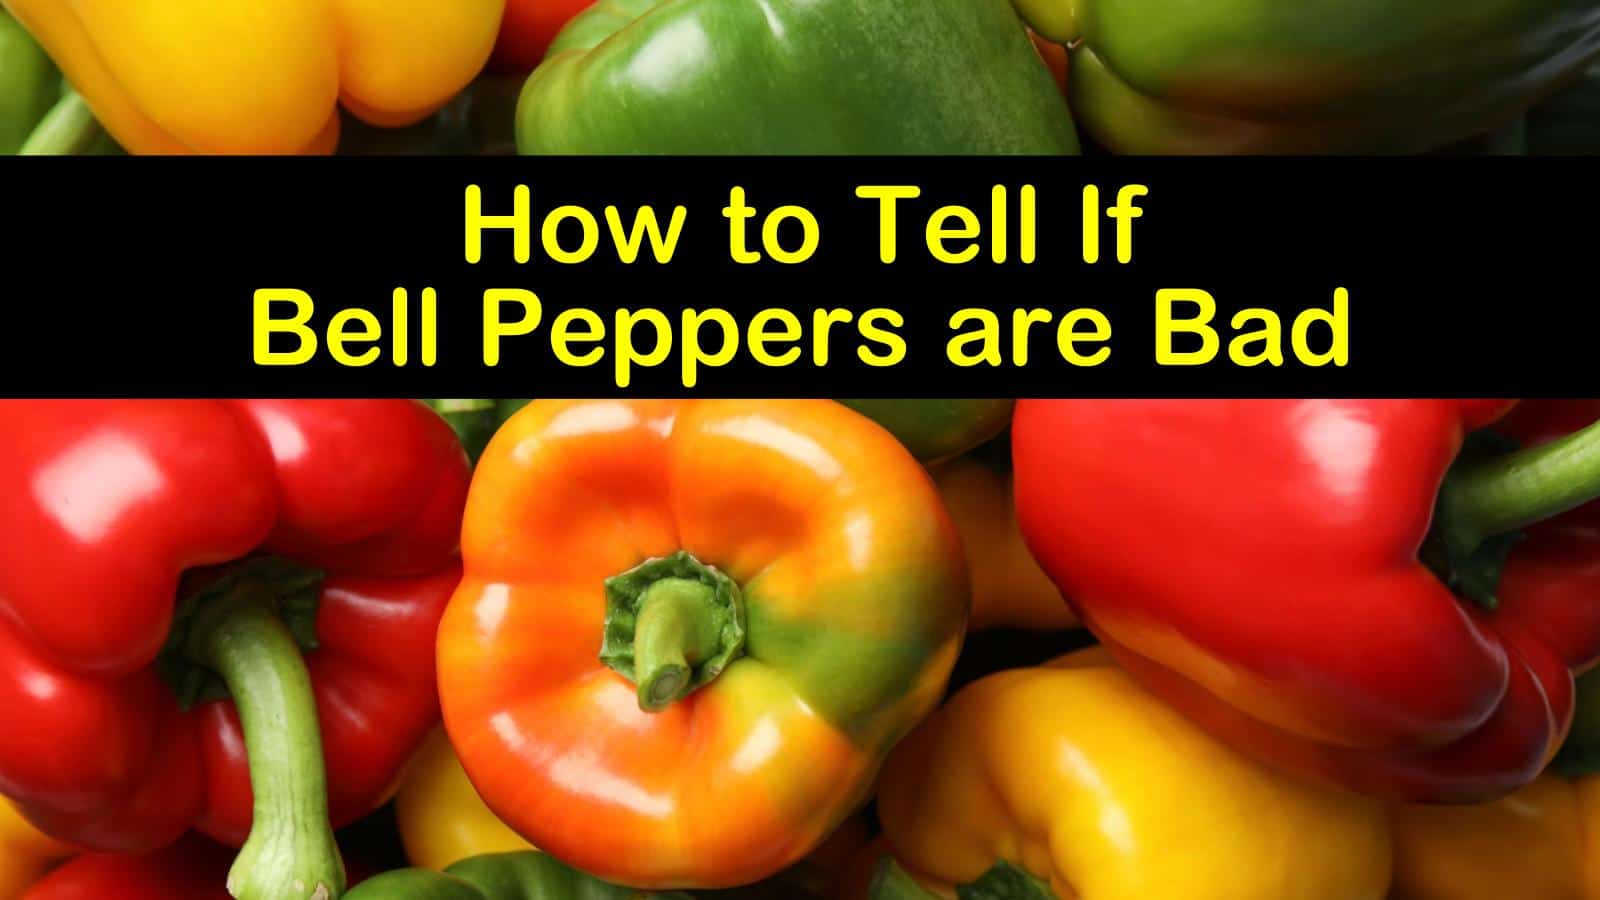 how to tell if bell peppers are bad titleimg1